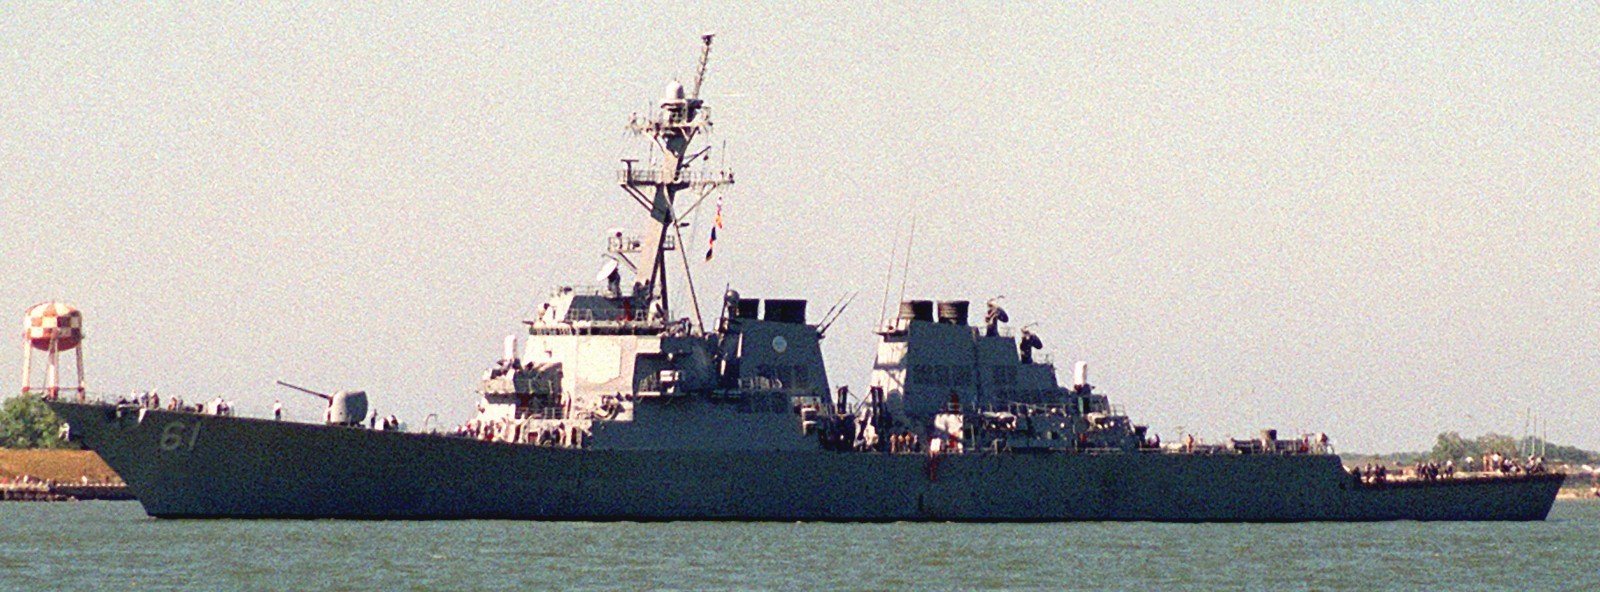 ddg-61 uss ramage guided missile destroyer us navy 72